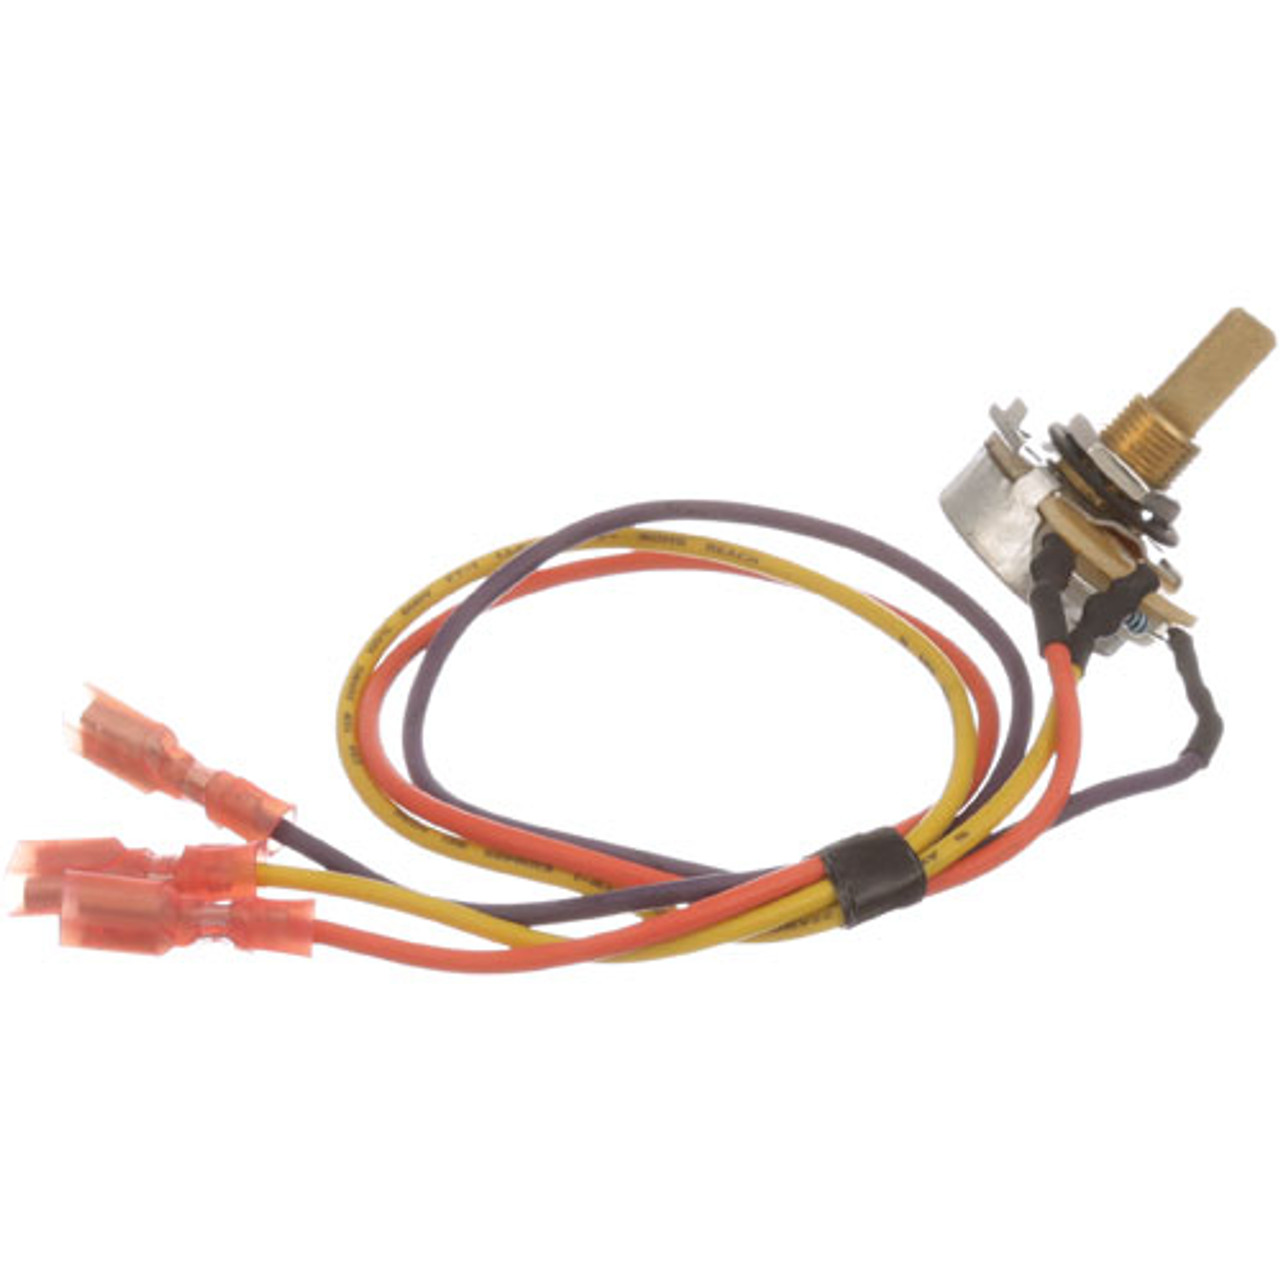 Potentiometer - Replacement Part For Blodgett BL18234